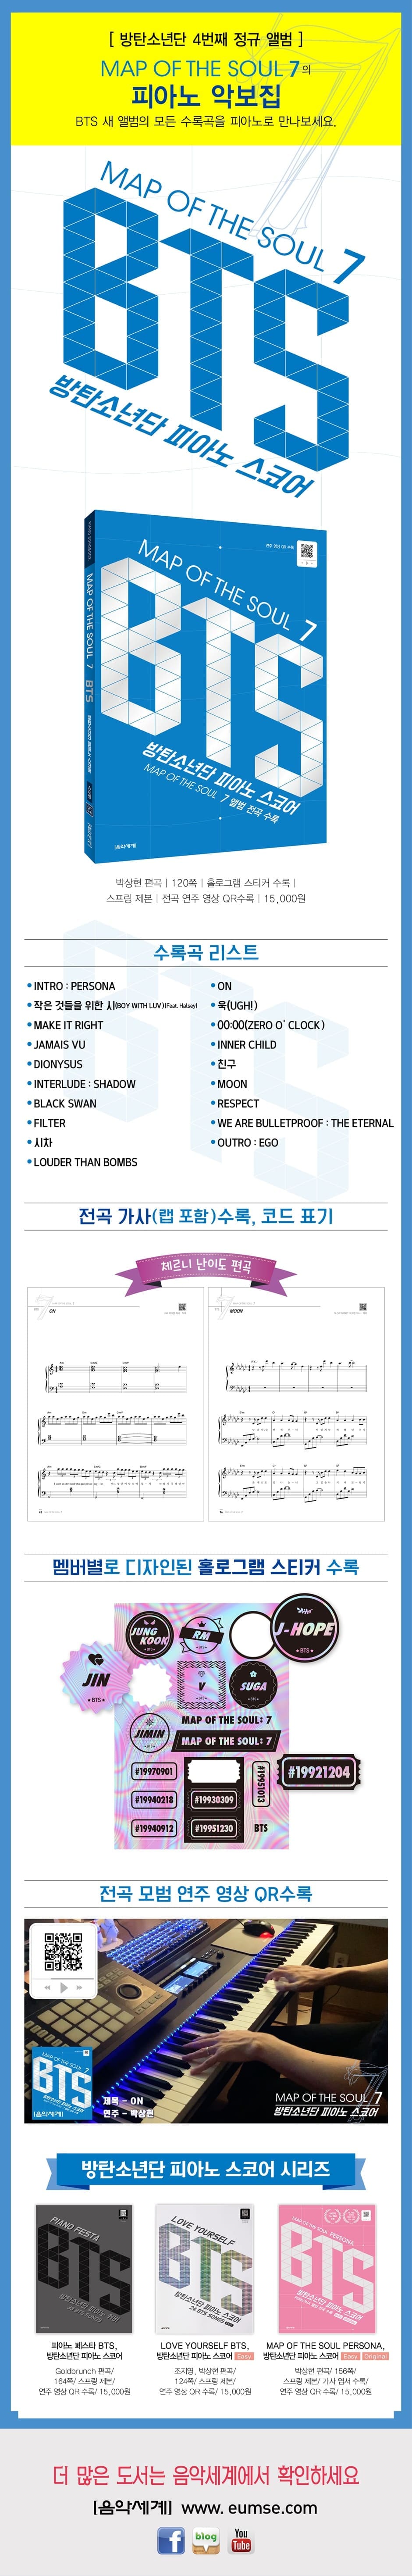 BTS MAP OF THE SOUL 7 - PIANO SCORE BOOK